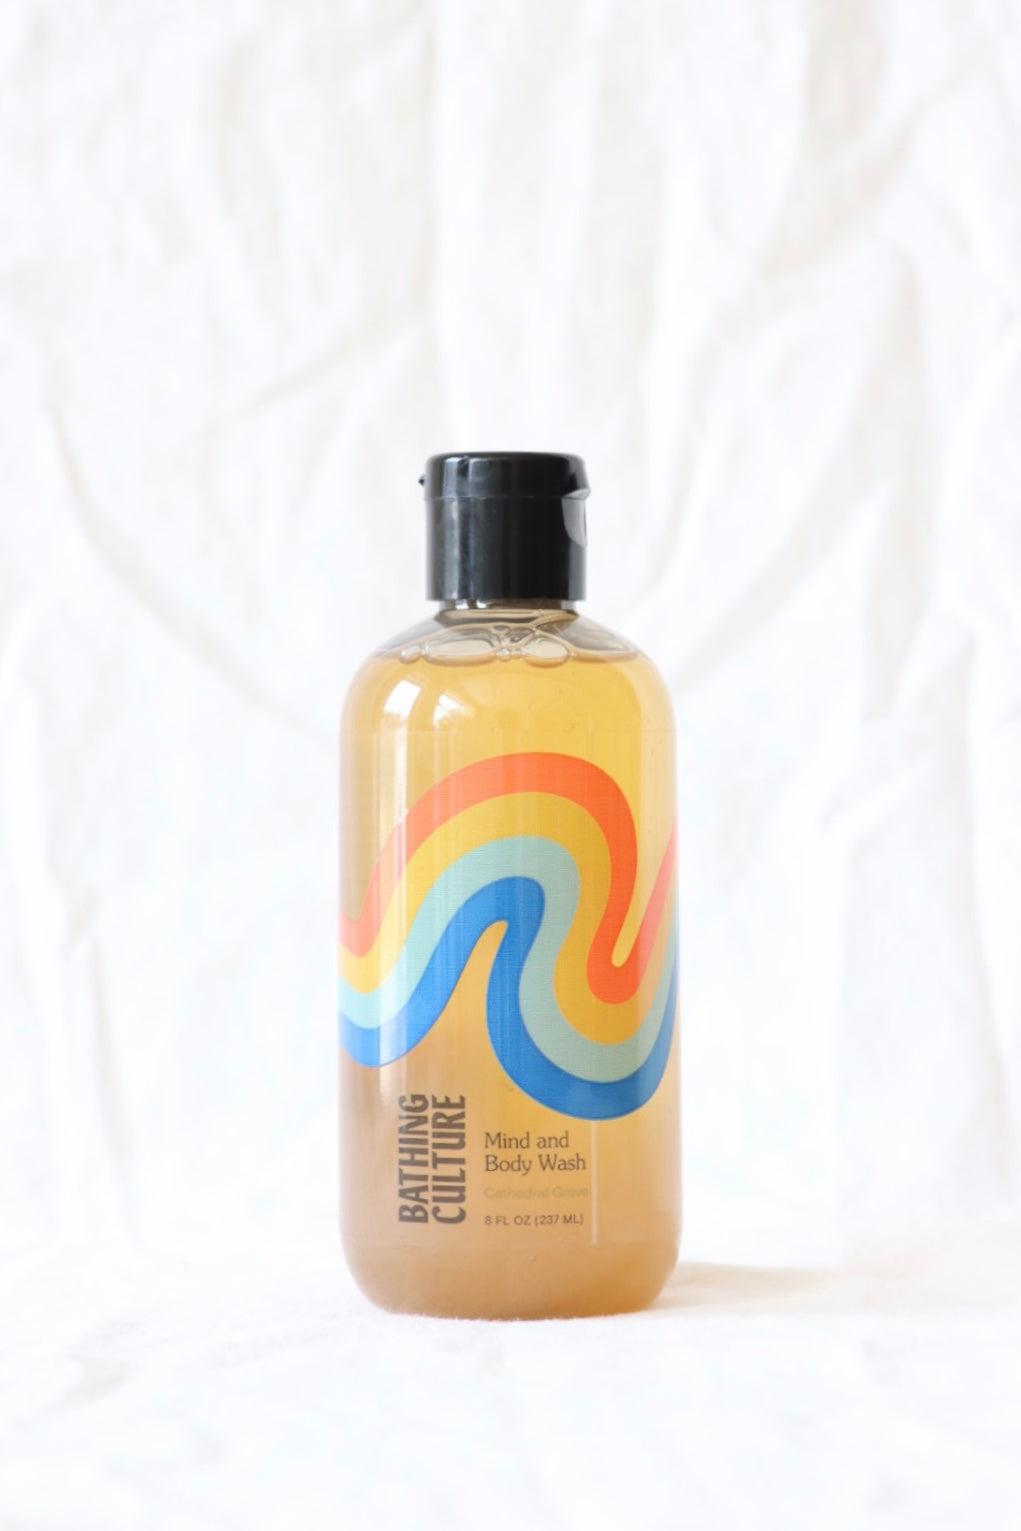 8 Ounce Mind and Body Wash